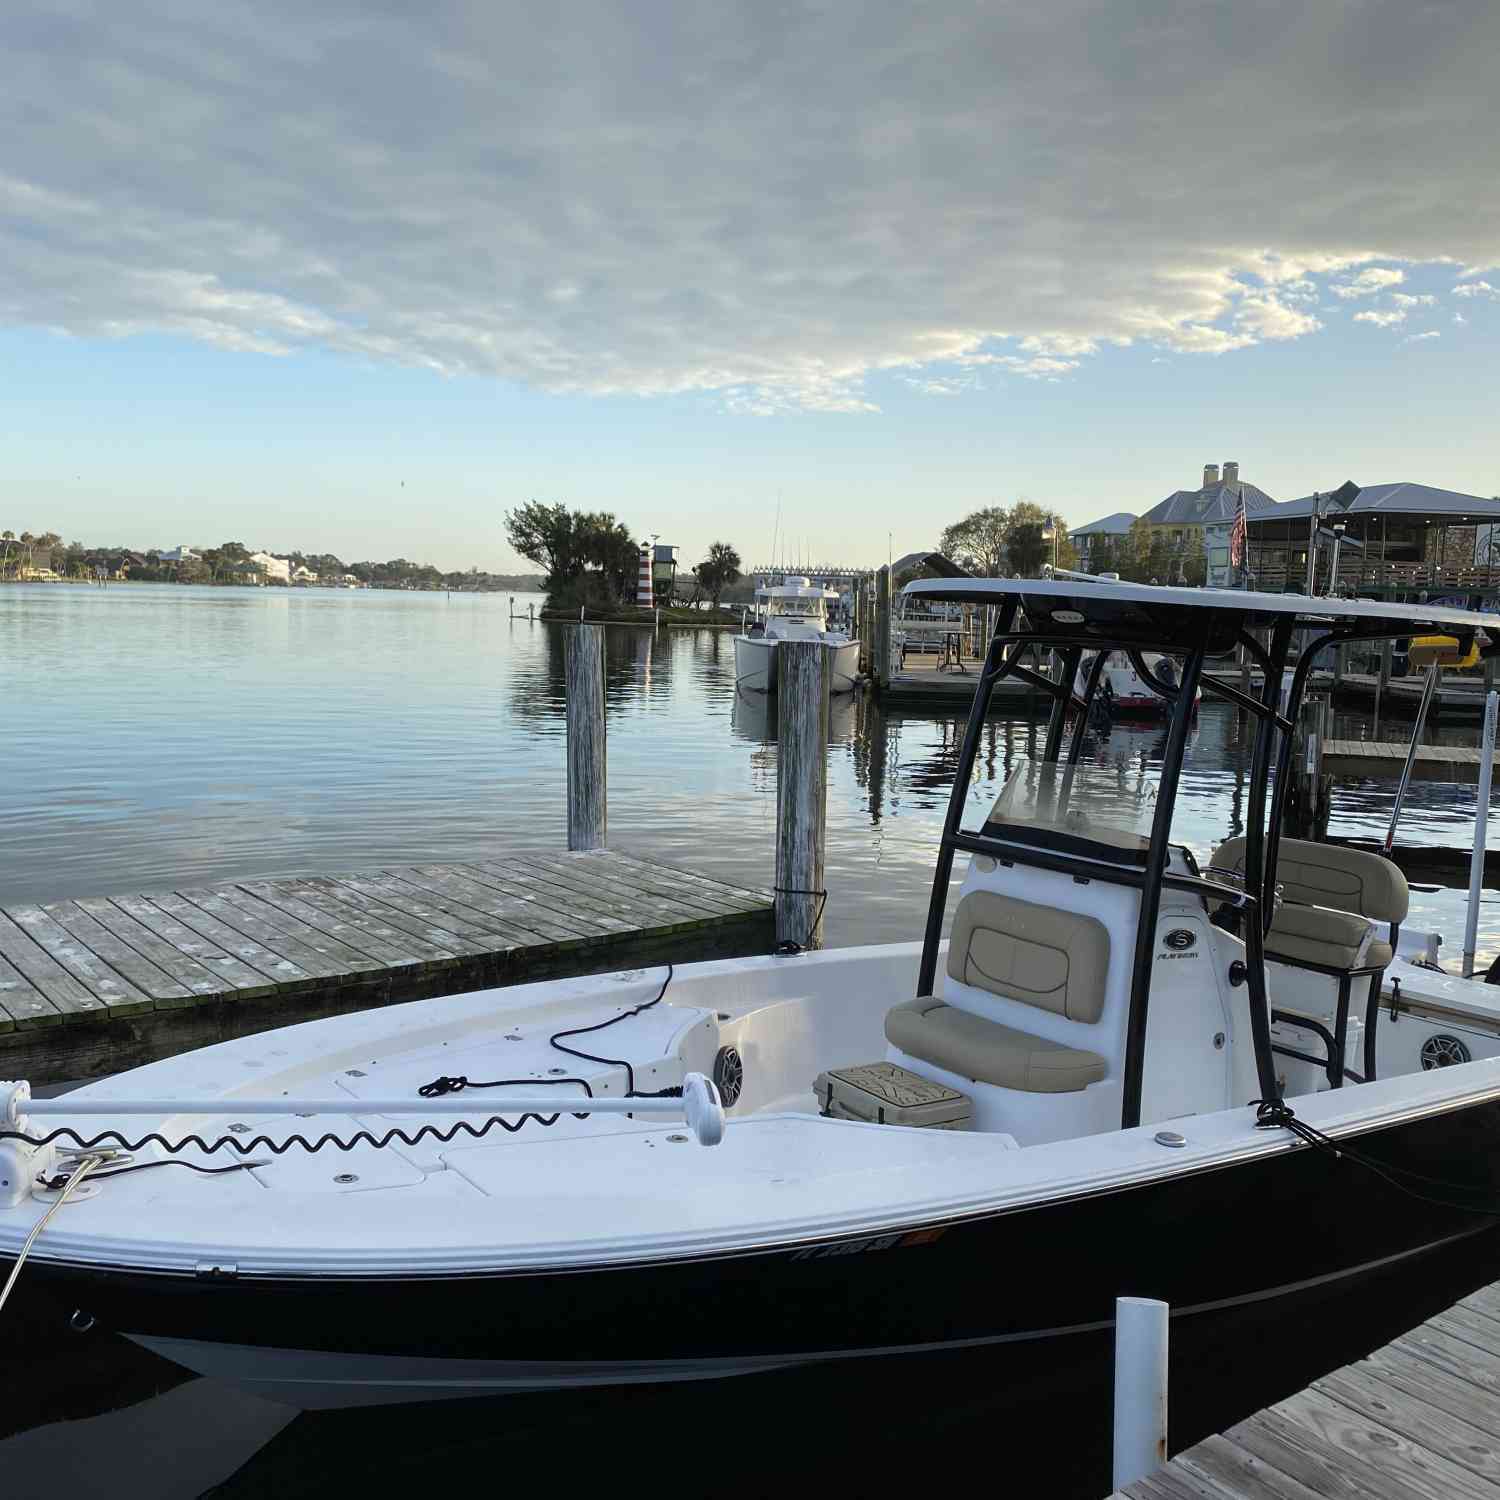 One of our favorite places to boat and fish is homosassa FL. We often rent a hotel on the river...